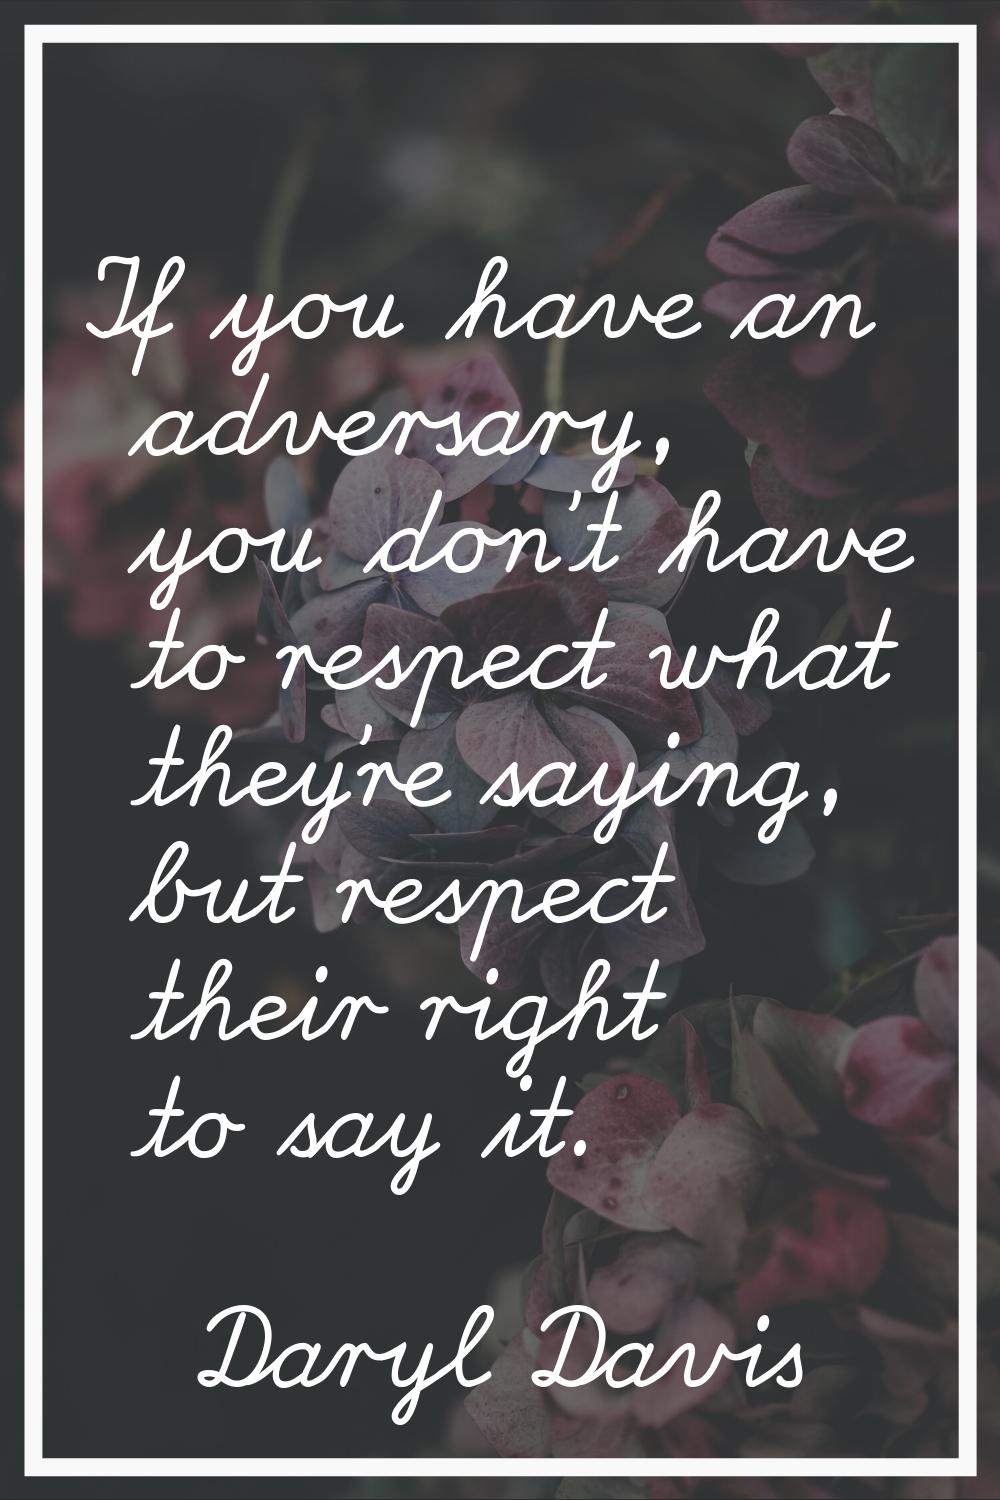 If you have an adversary, you don't have to respect what they're saying, but respect their right to